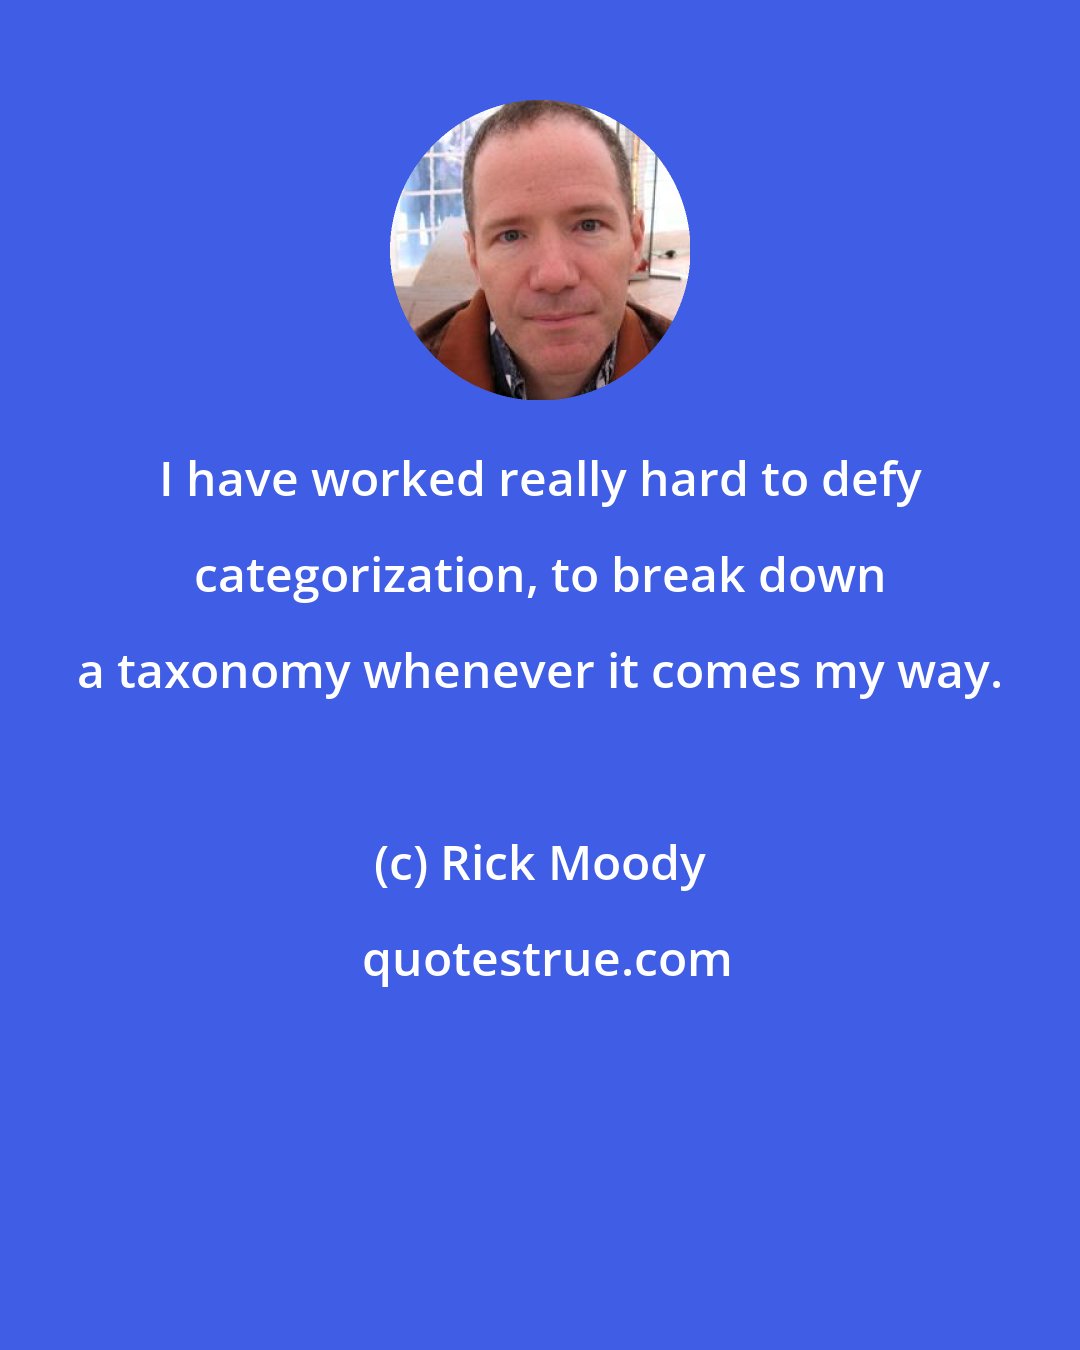 Rick Moody: I have worked really hard to defy categorization, to break down a taxonomy whenever it comes my way.